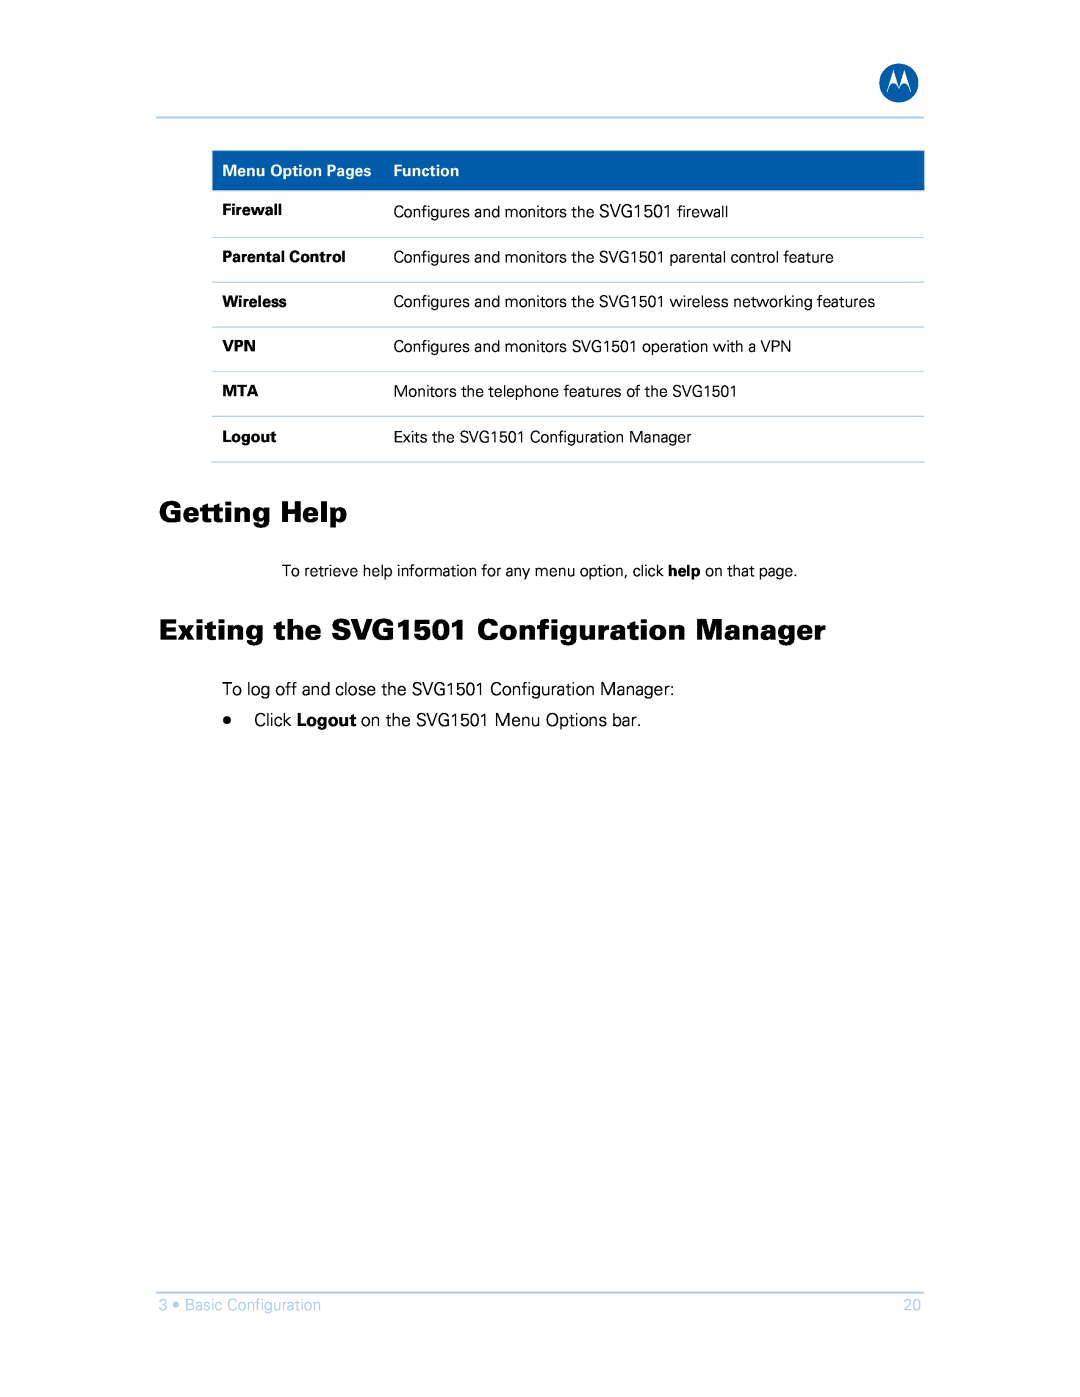 Motorola SVG1501UE Getting Help, Exiting the SVG1501 Configuration Manager, Menu Option Pages, Function, Firewall, Logout 